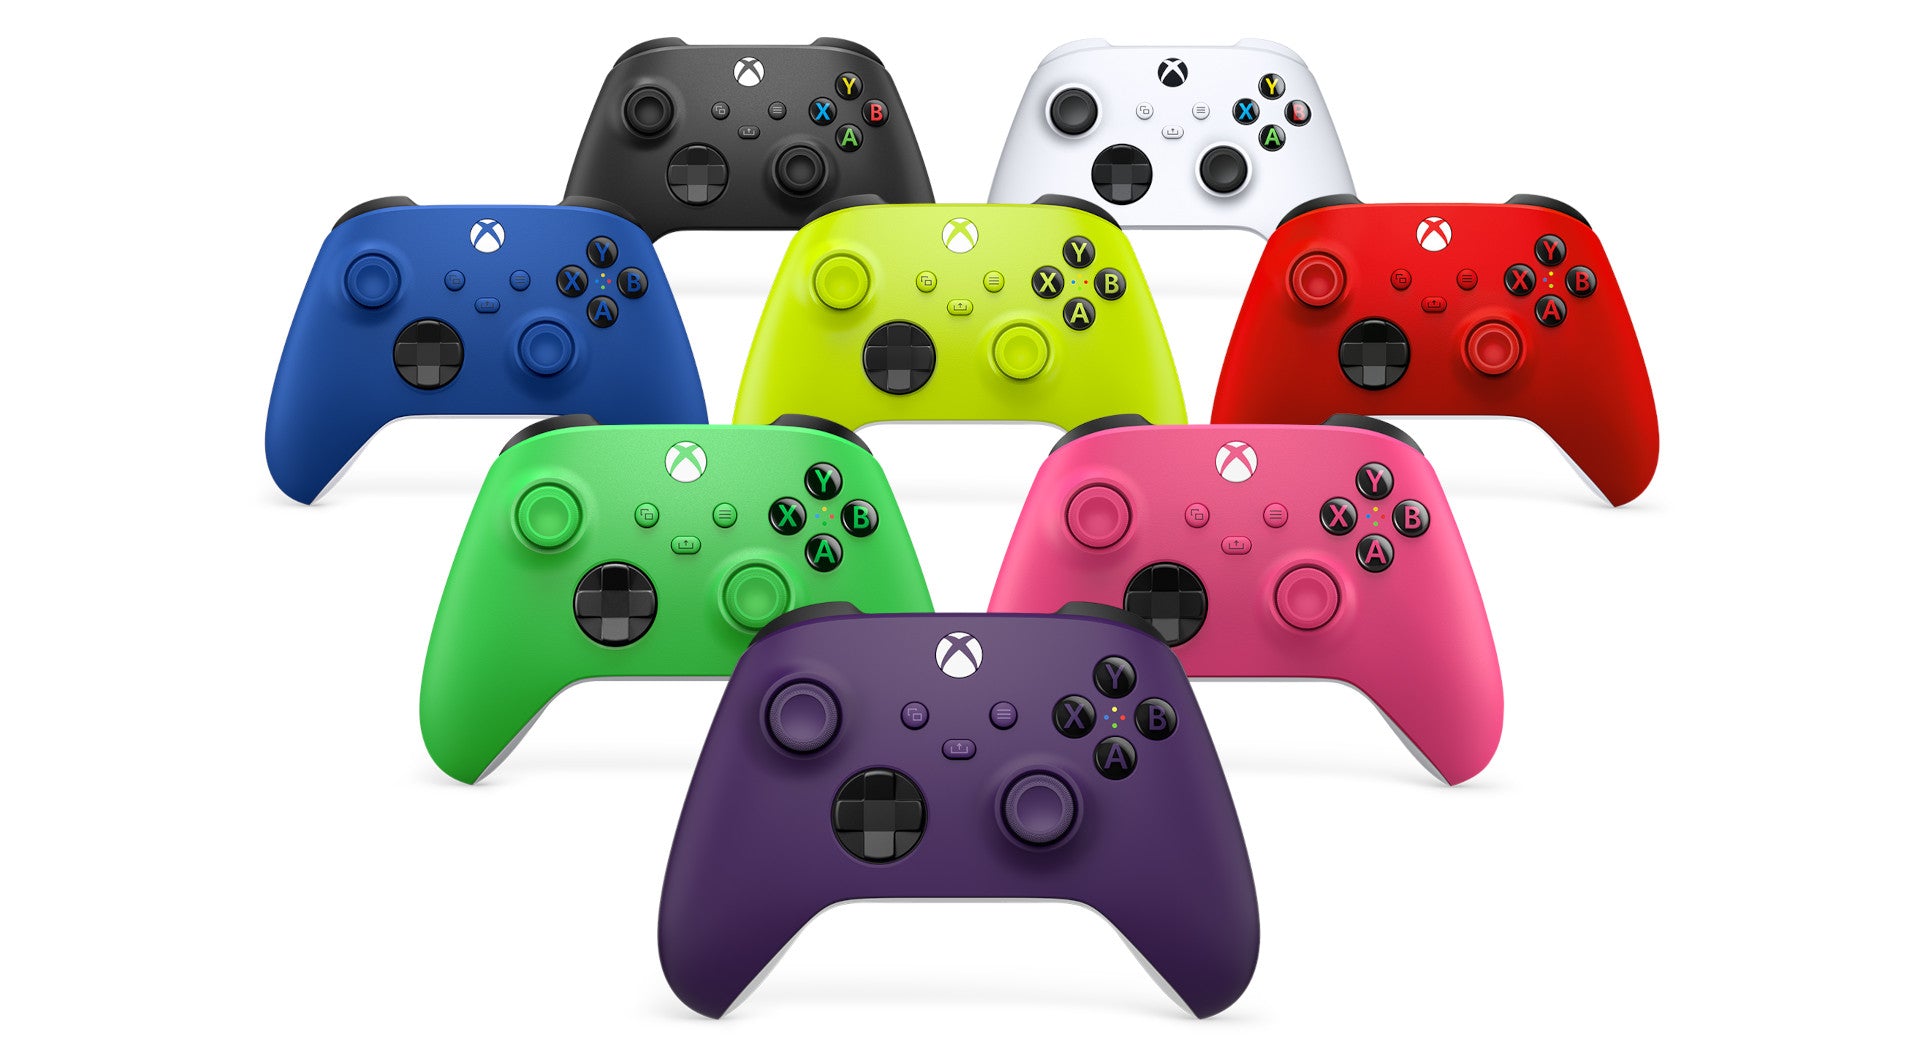 Native USB controller support for all Xbox One controllers and full compatibility across the entire Xbox game library.